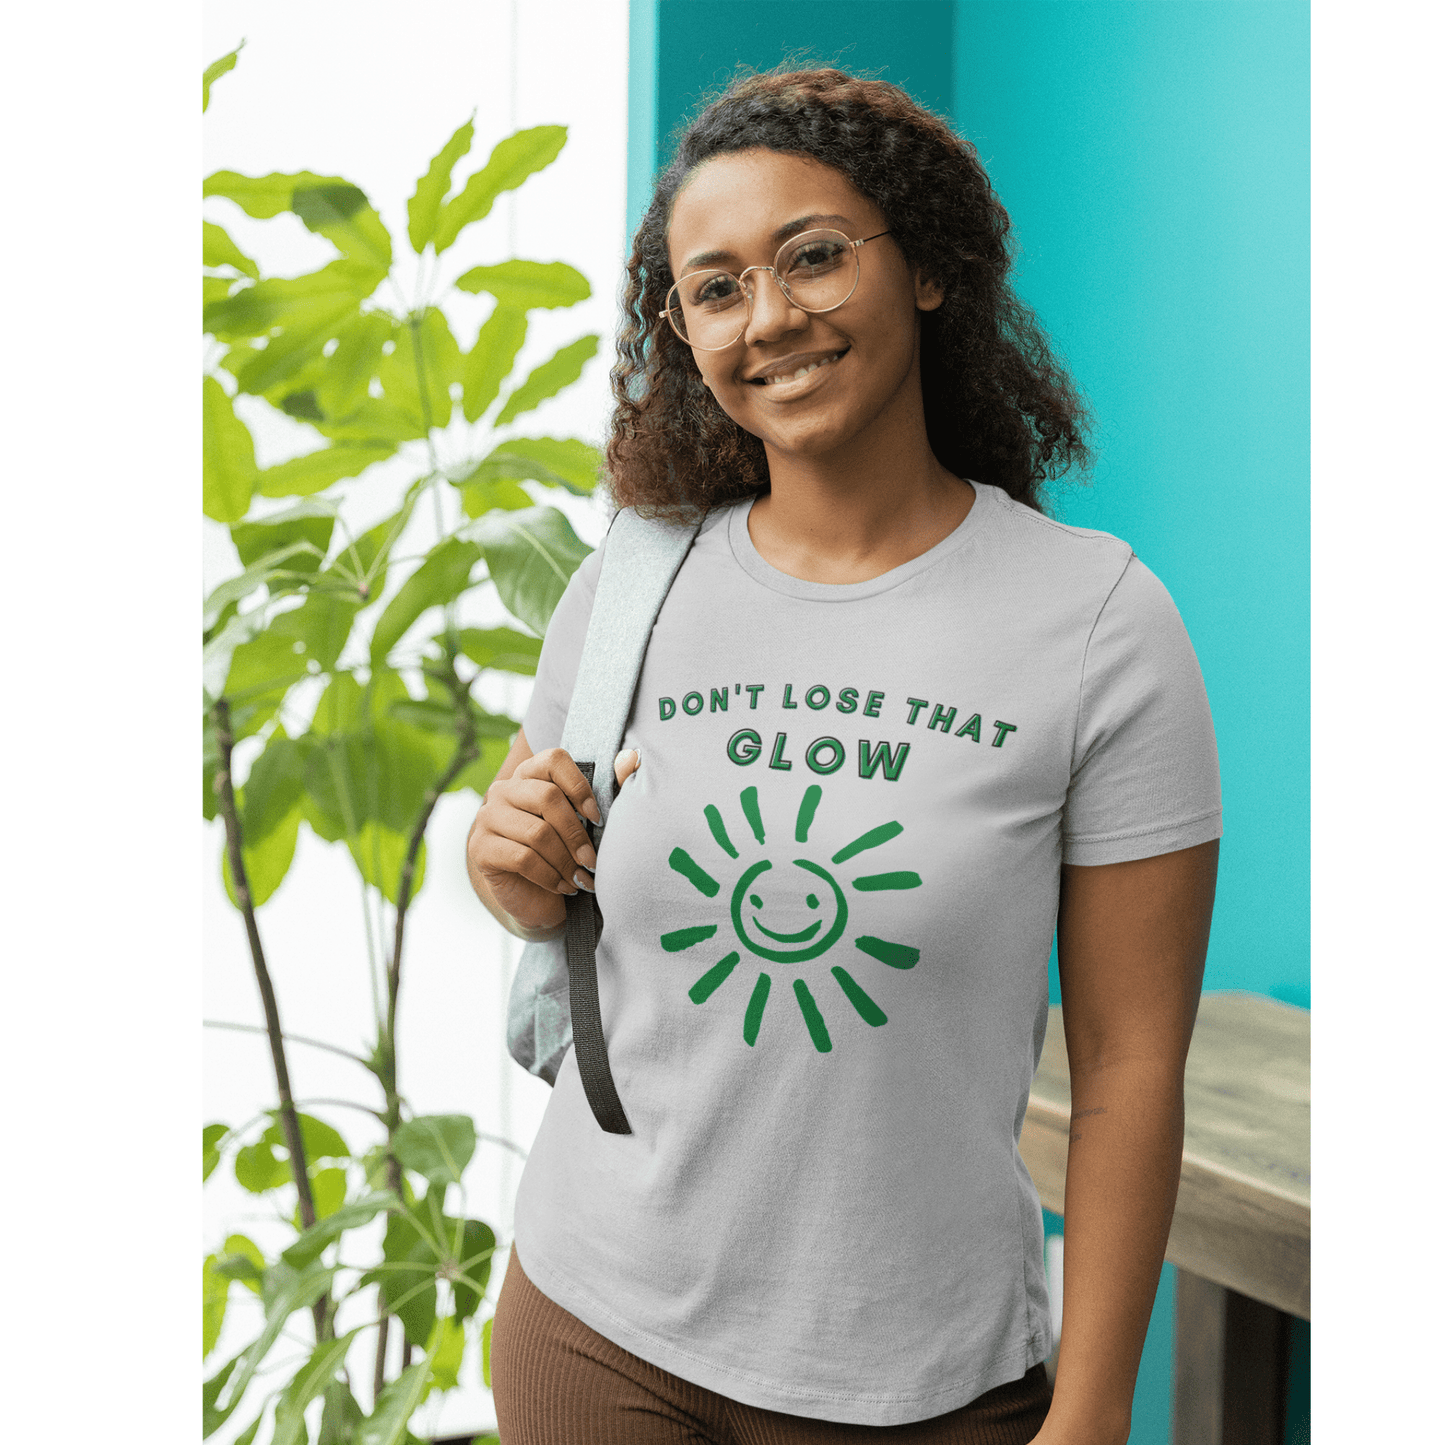 Don't Lose that Glow(Graphic Green Text with Smiling Sun) Unisex Jersey Short Sleeve Tee - Style: Bella+Canvas 3001